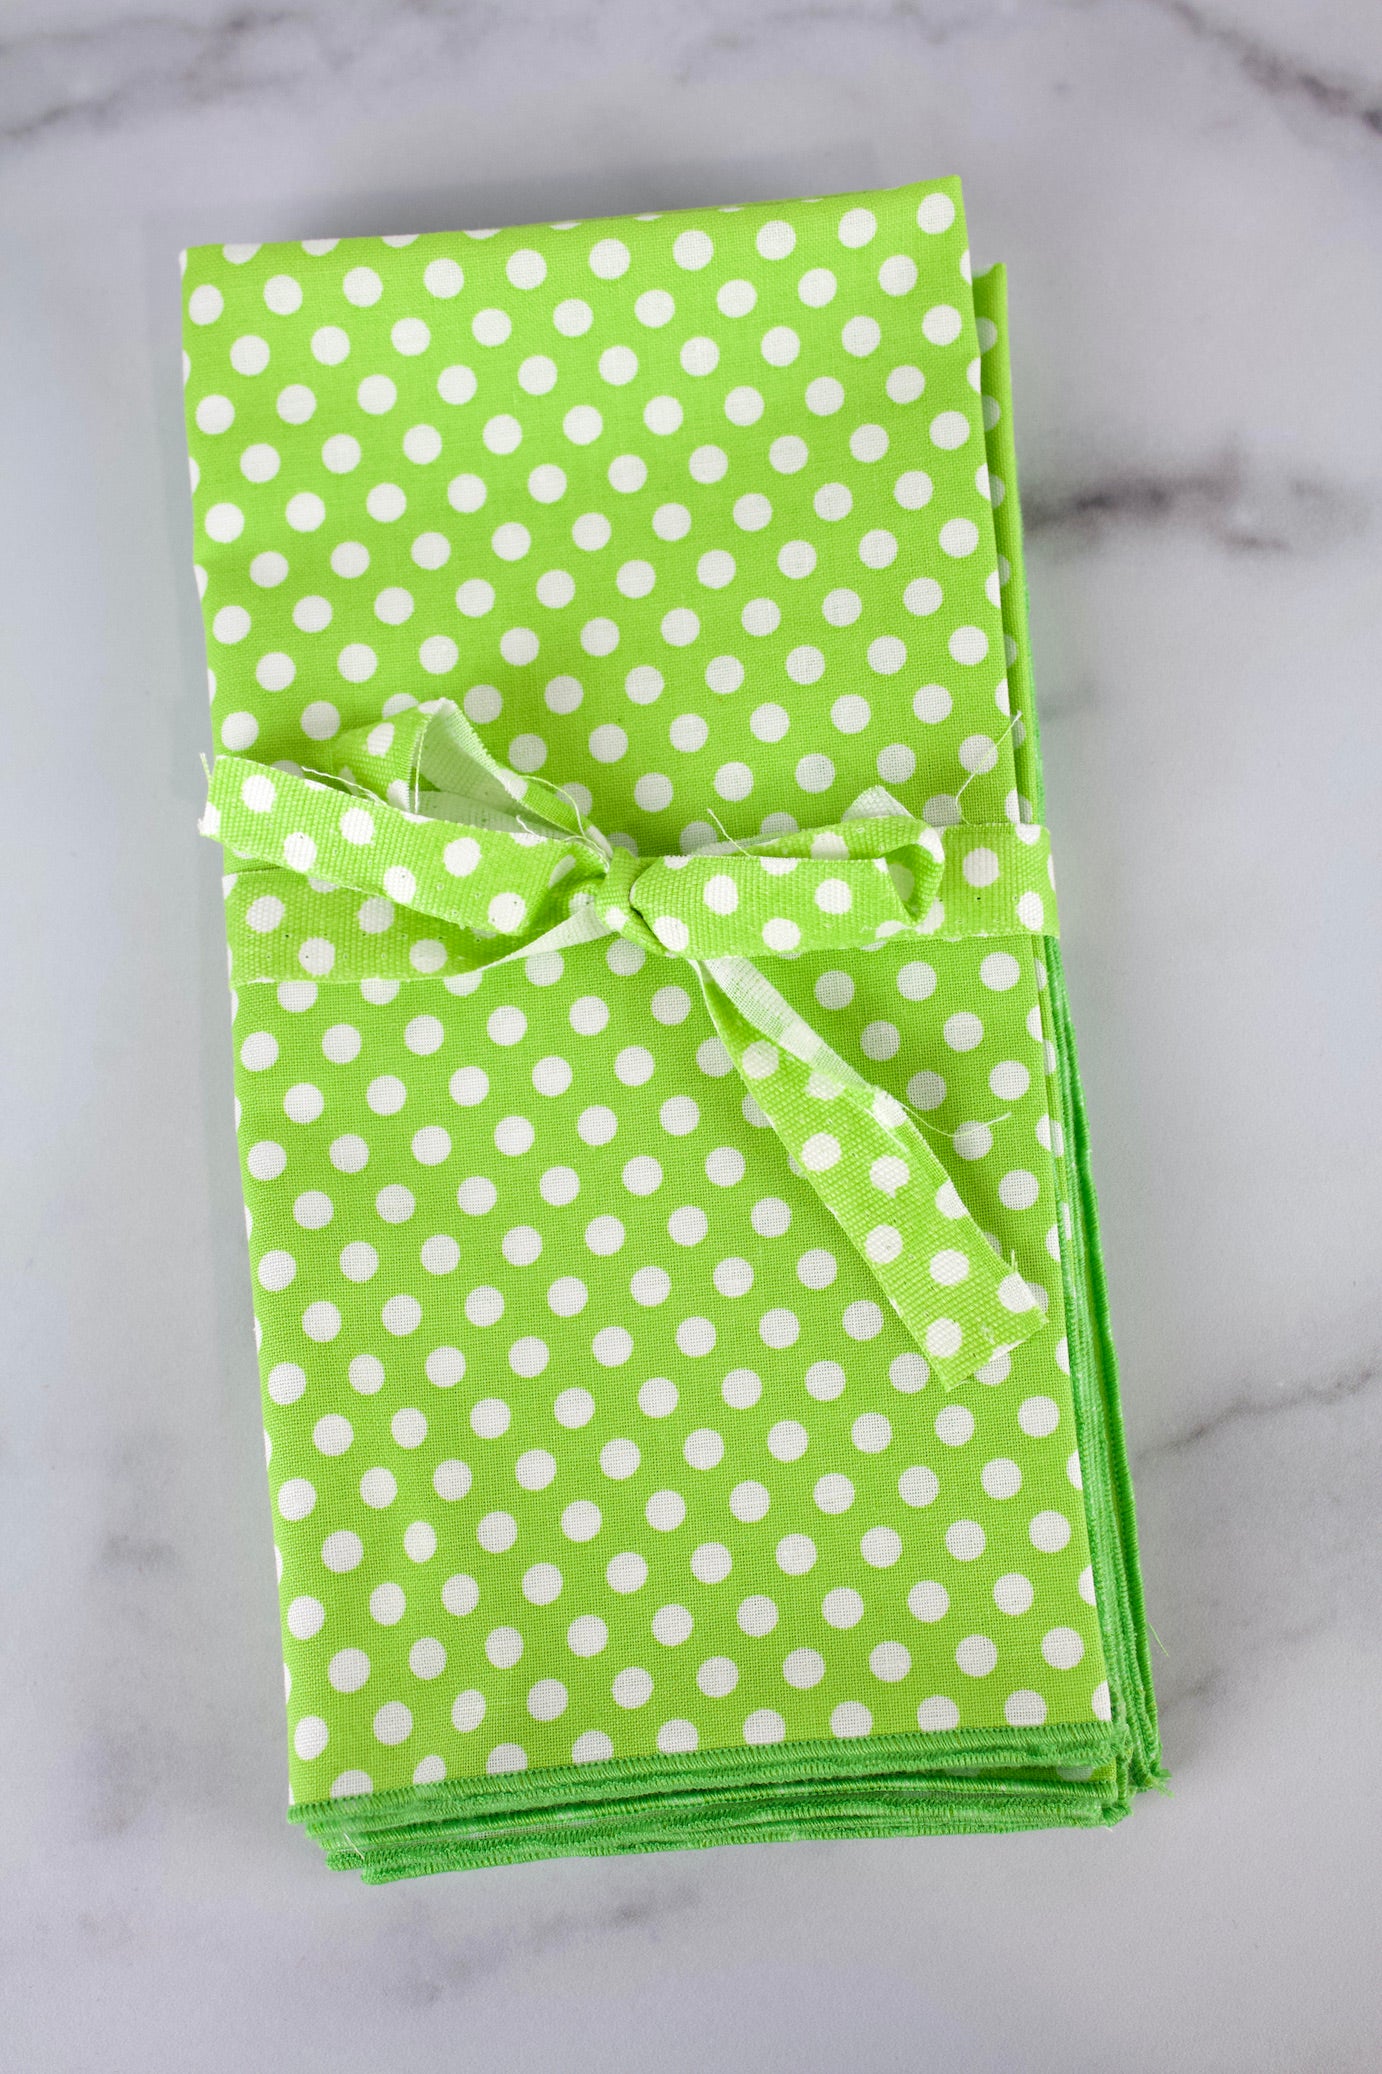 Kiwi Polka Dot Napkins (Set of 4)-The Blue Peony-Category_Napkins,Category_Table Linens,Color_Lime Green,Department_Kitchen,Material_Cotton,Pattern_Polka Dot